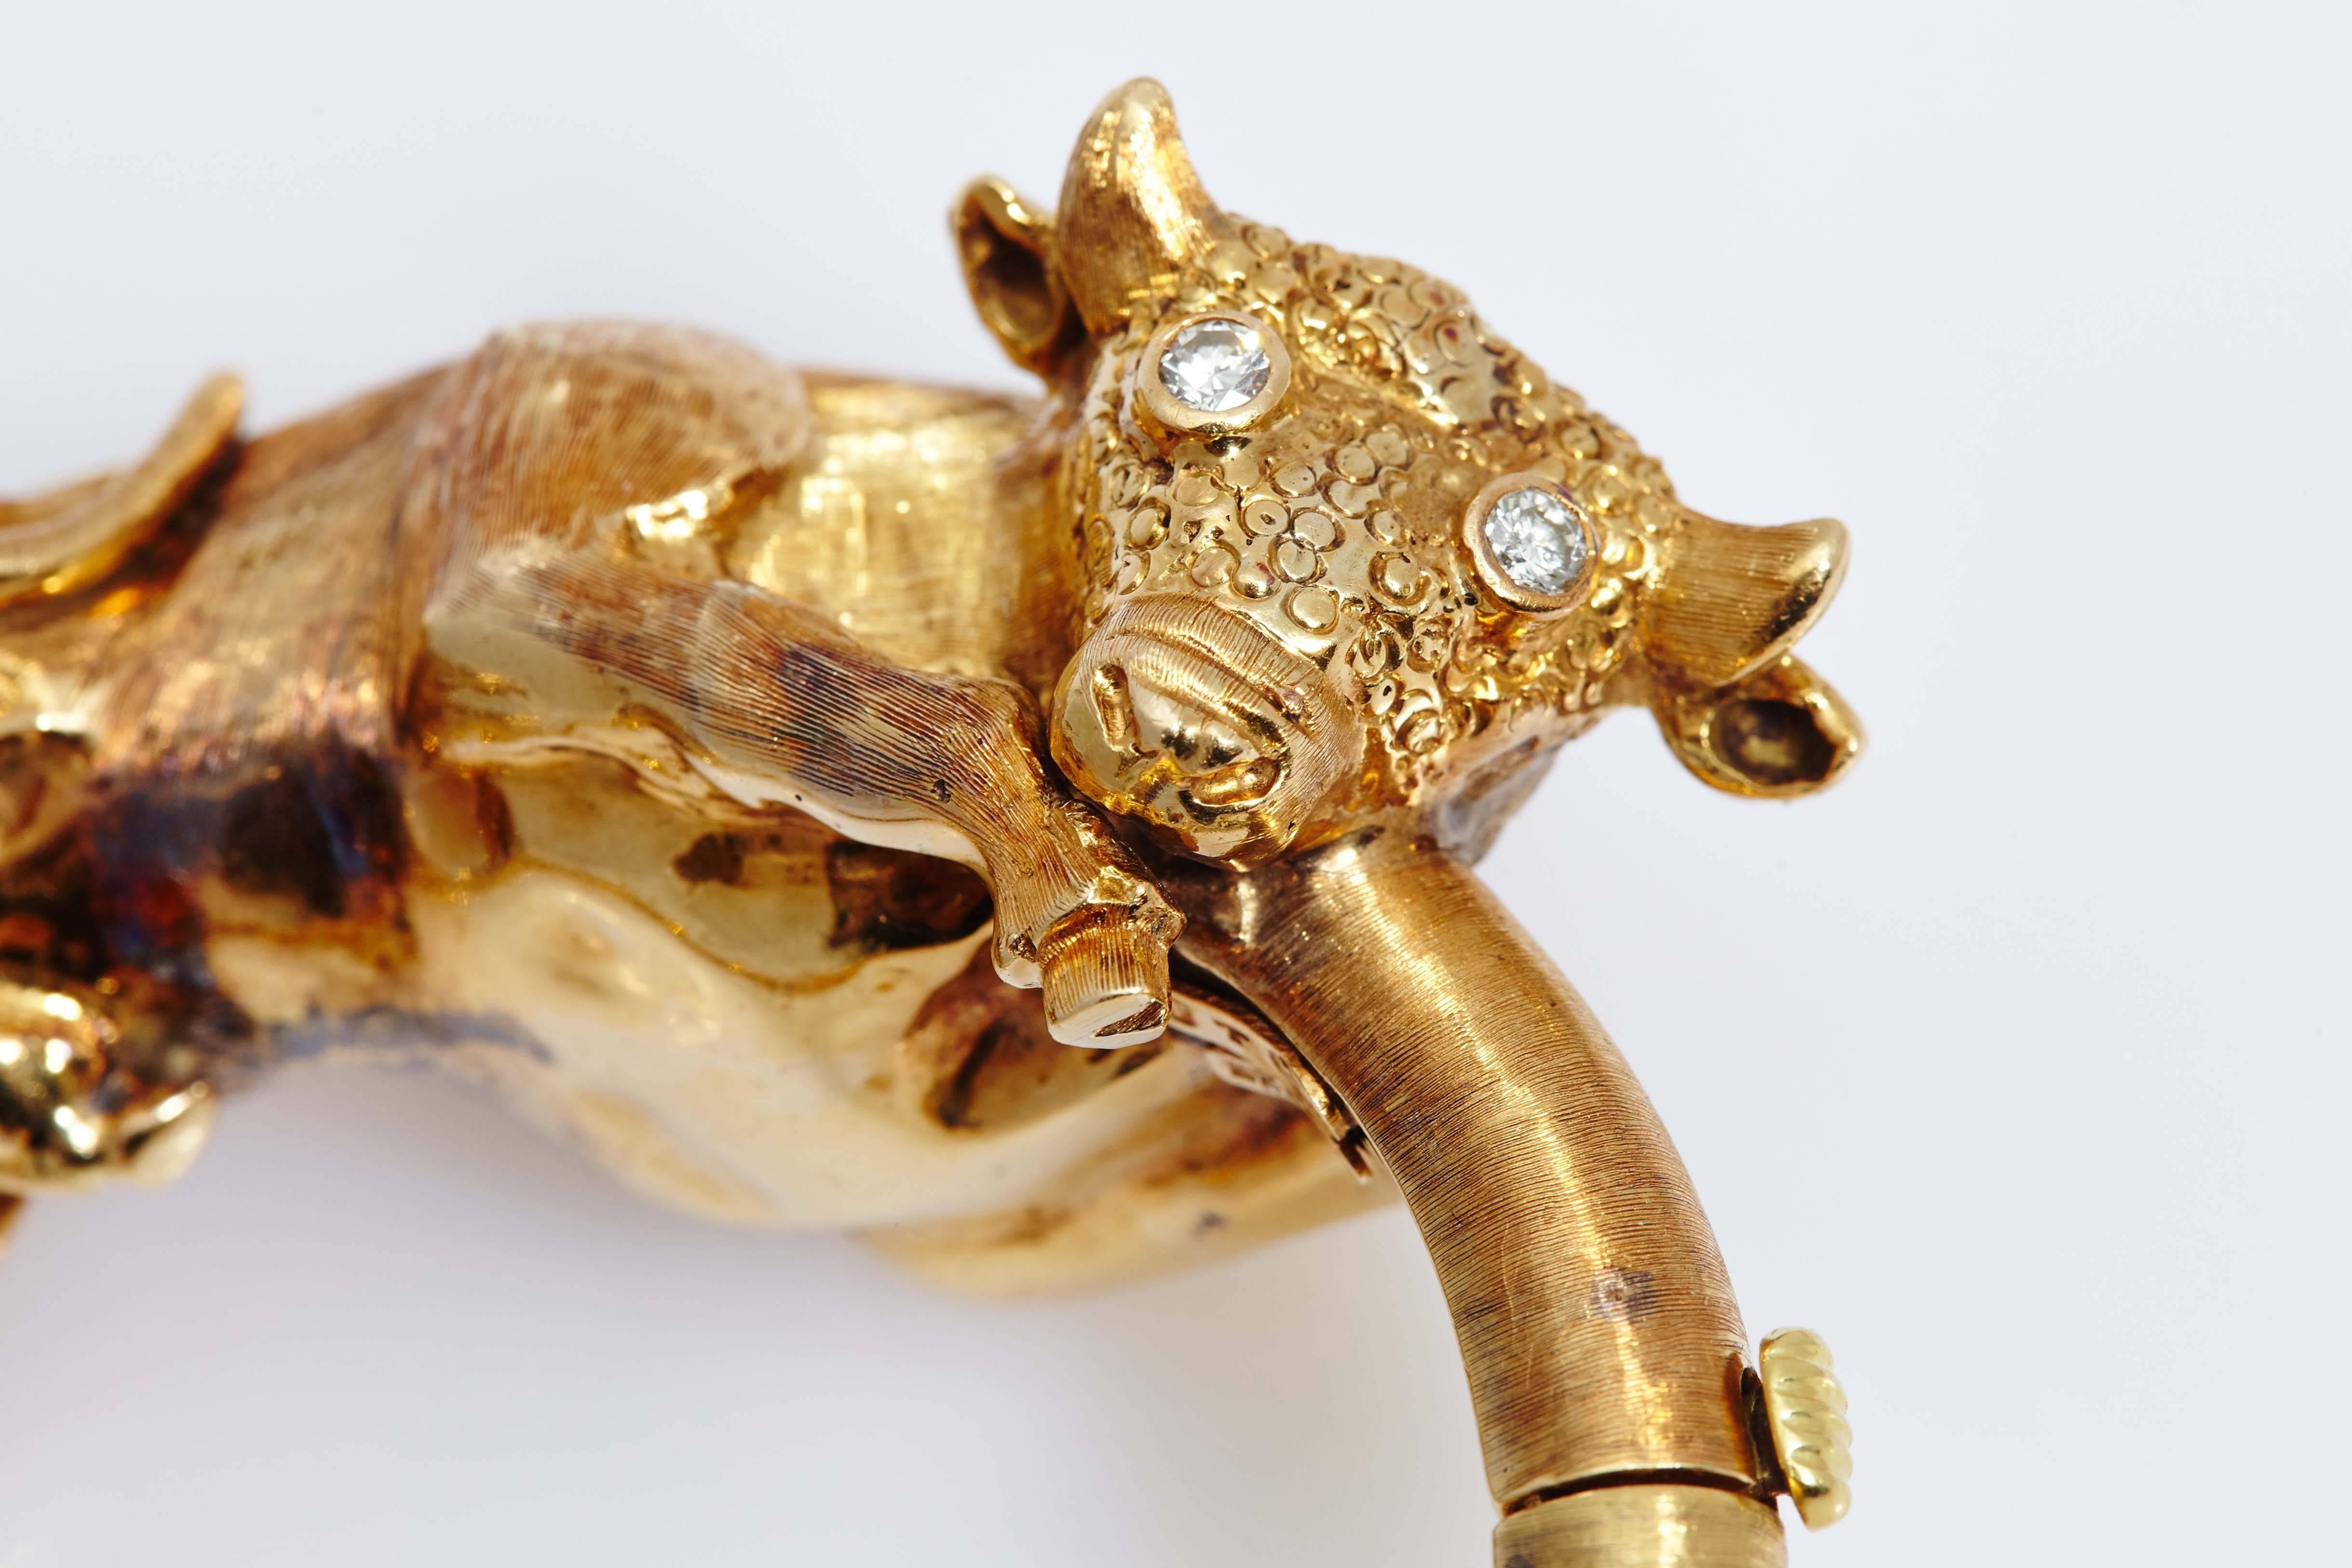 An iconic 18kt yellow gold Bull bracelet, with diamond eyes. Made in Greece, circa 1970.